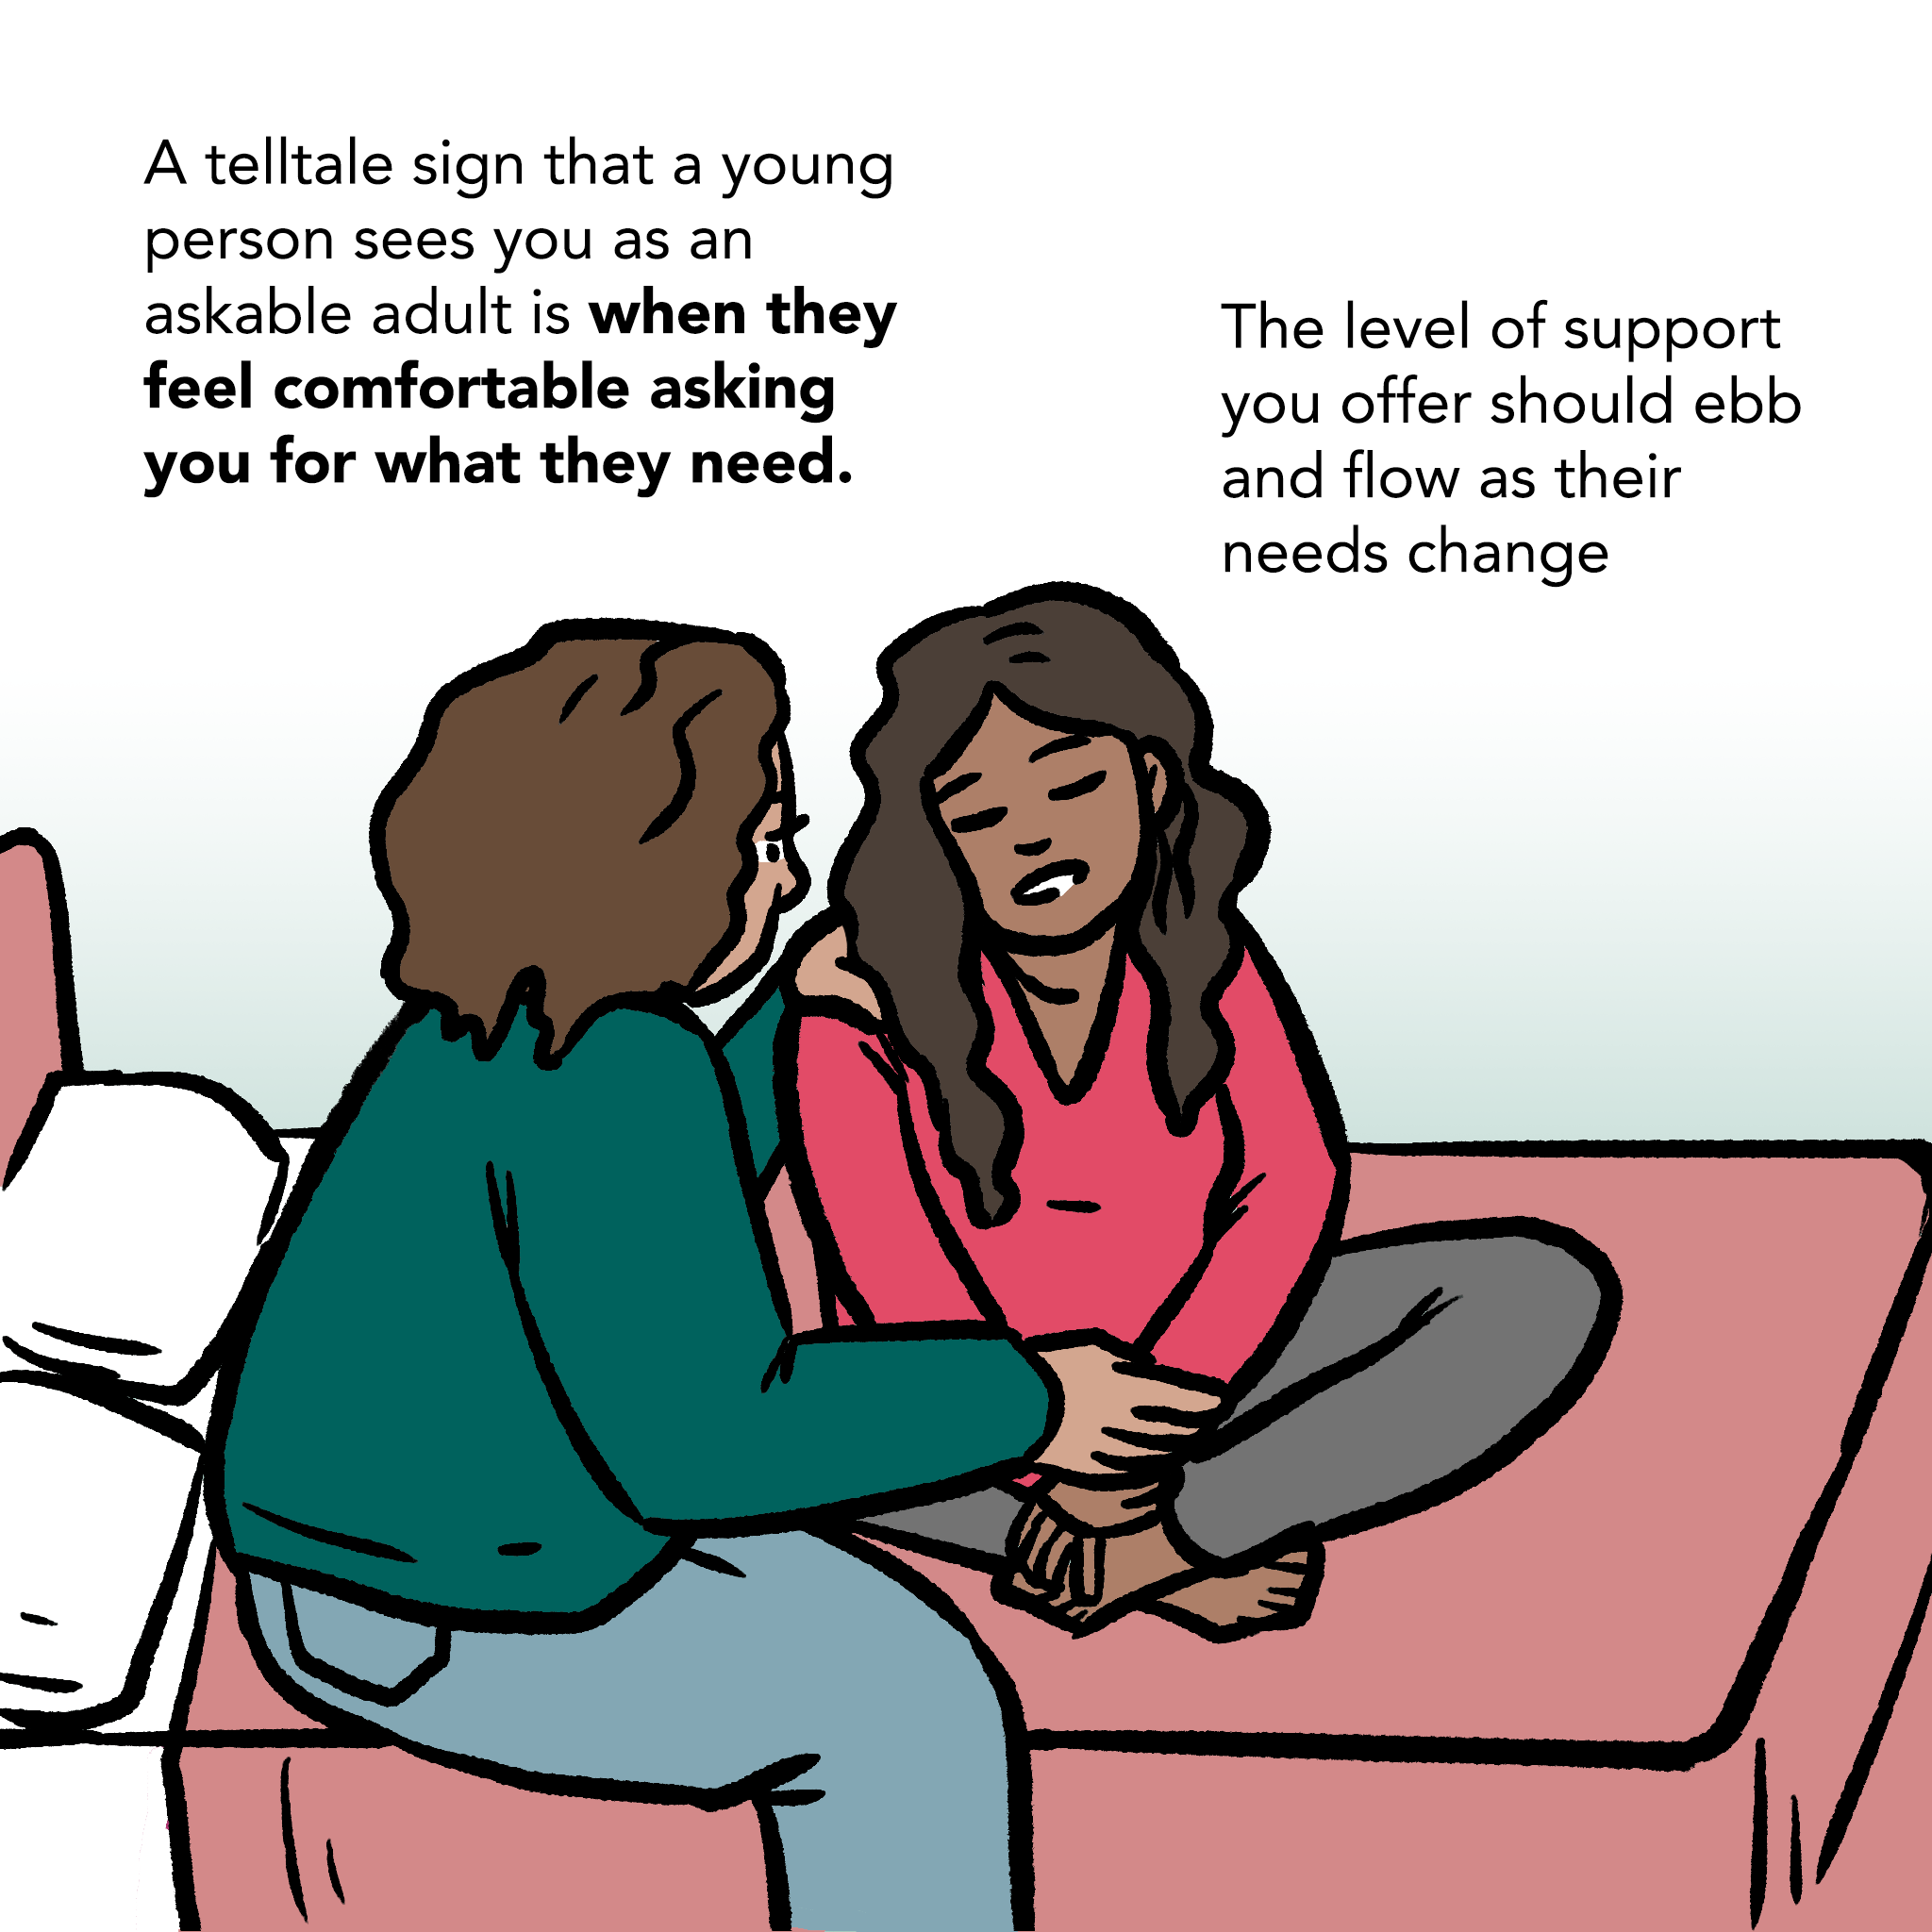 Illustration of an adult comforting a young person who looks sad. Caption says "A telltale sign that a youth sees you as an askable adult is when they feel comfortable asking you for what they need. The level of support you offer should ebb and flow as their needs change."